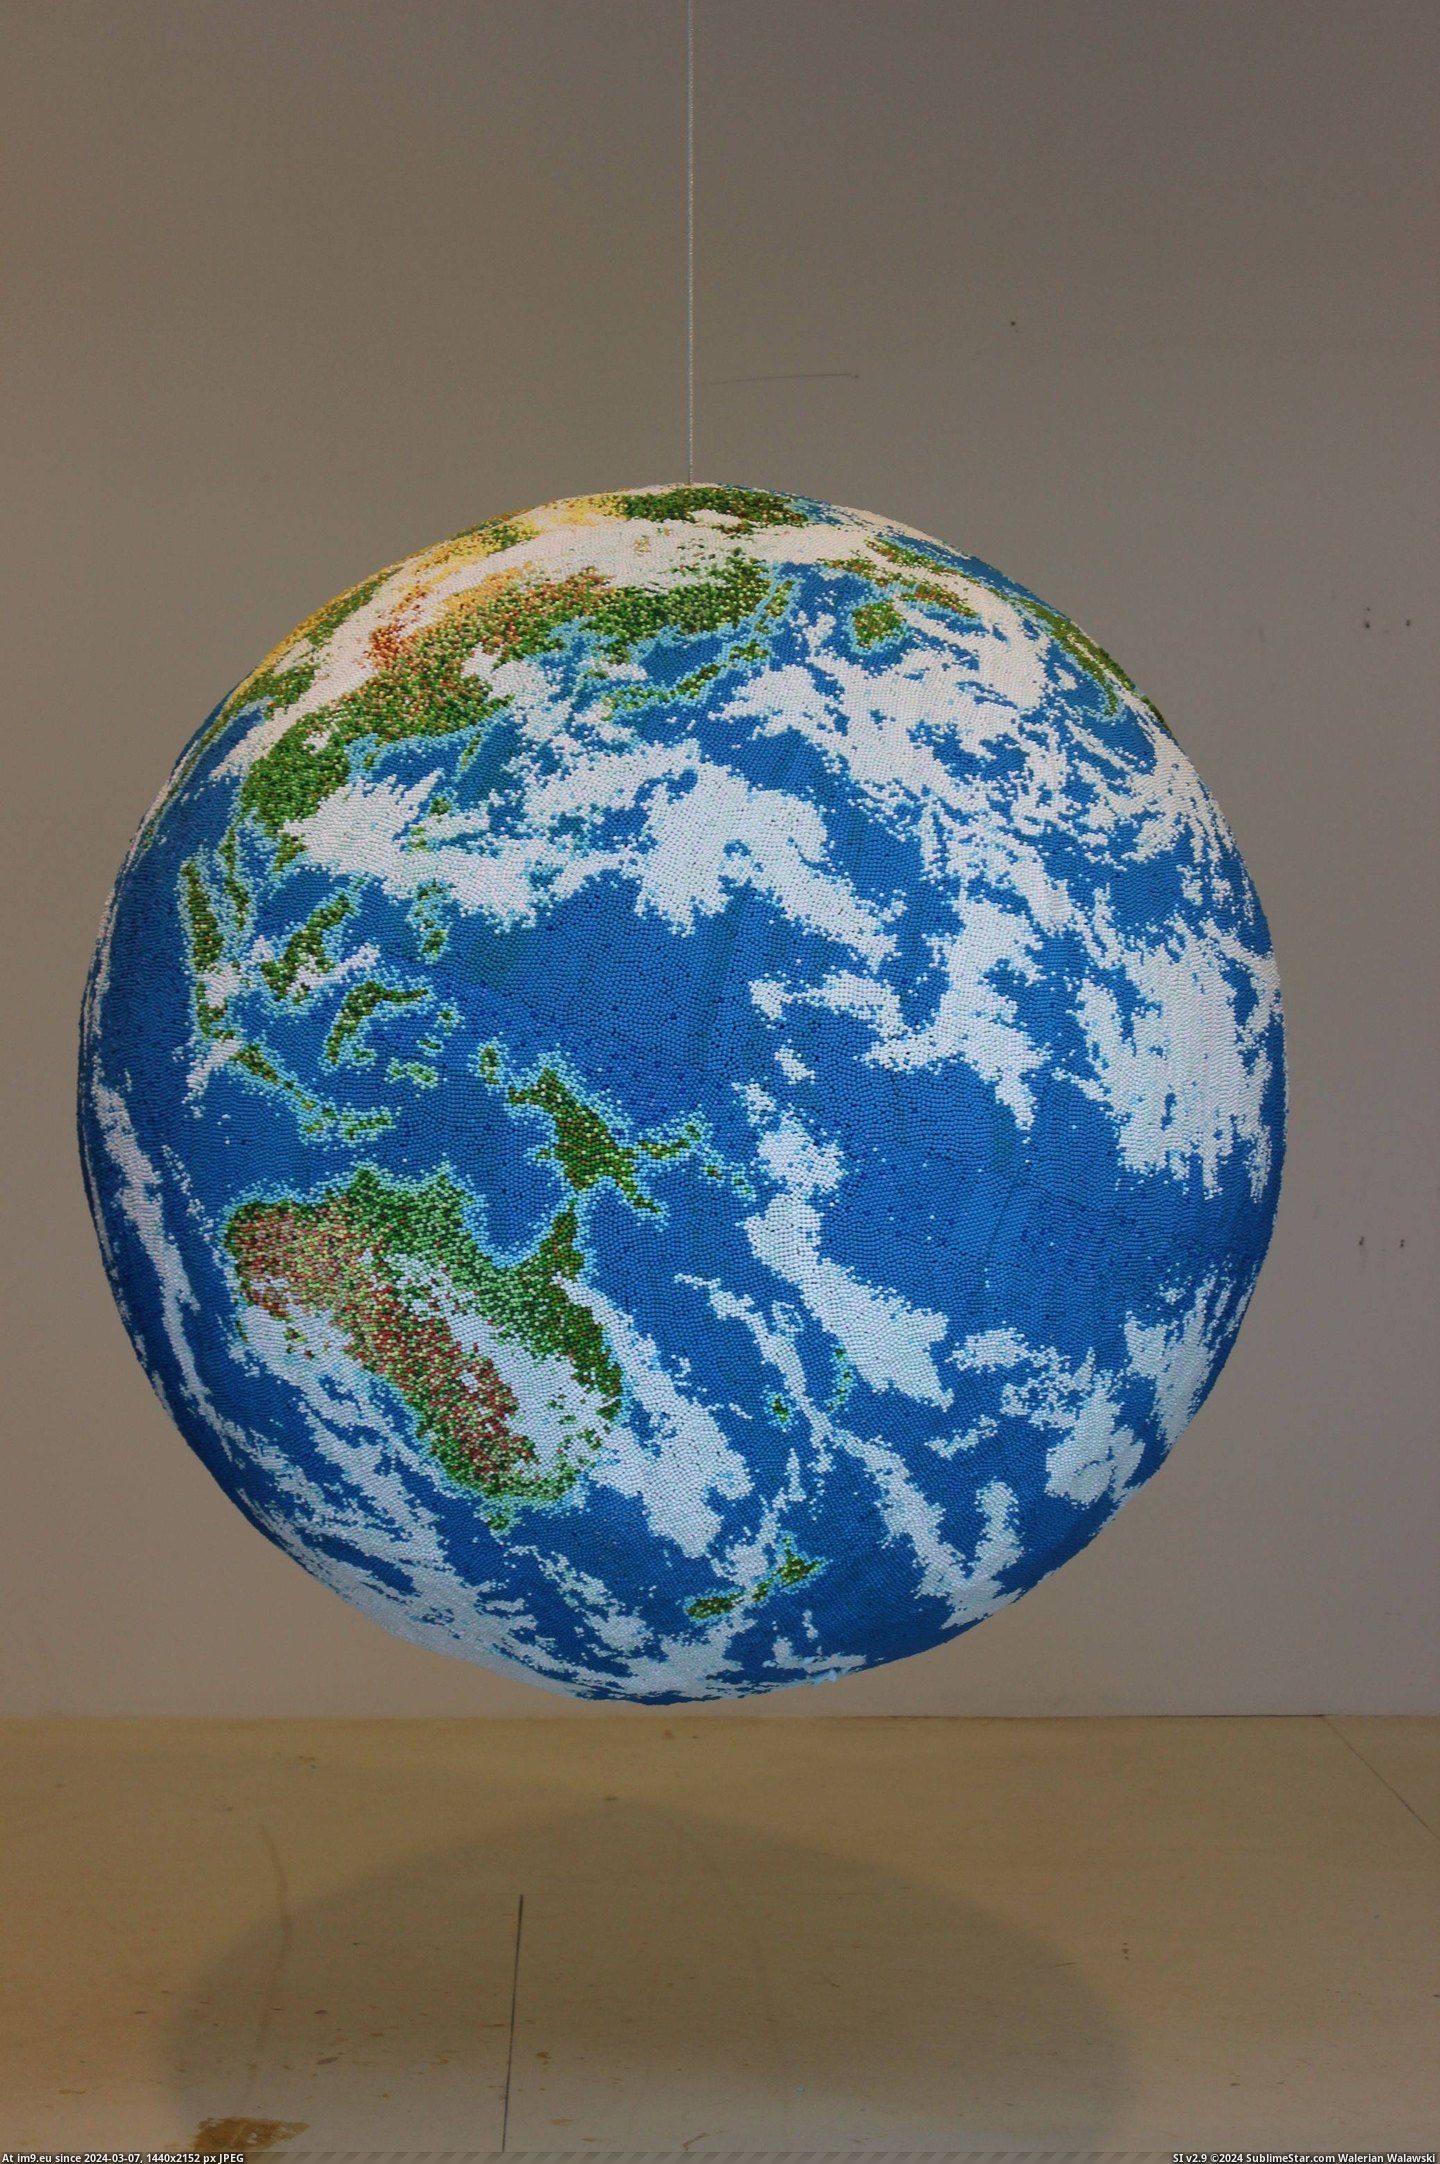 #Years #Making #Globe #Matches #Sculptor #Dad #Spent [Pics] My dad is a sculptor and has spent 2 years making this globe made entirely out of matches. 12 Pic. (Image of album My r/PICS favs))